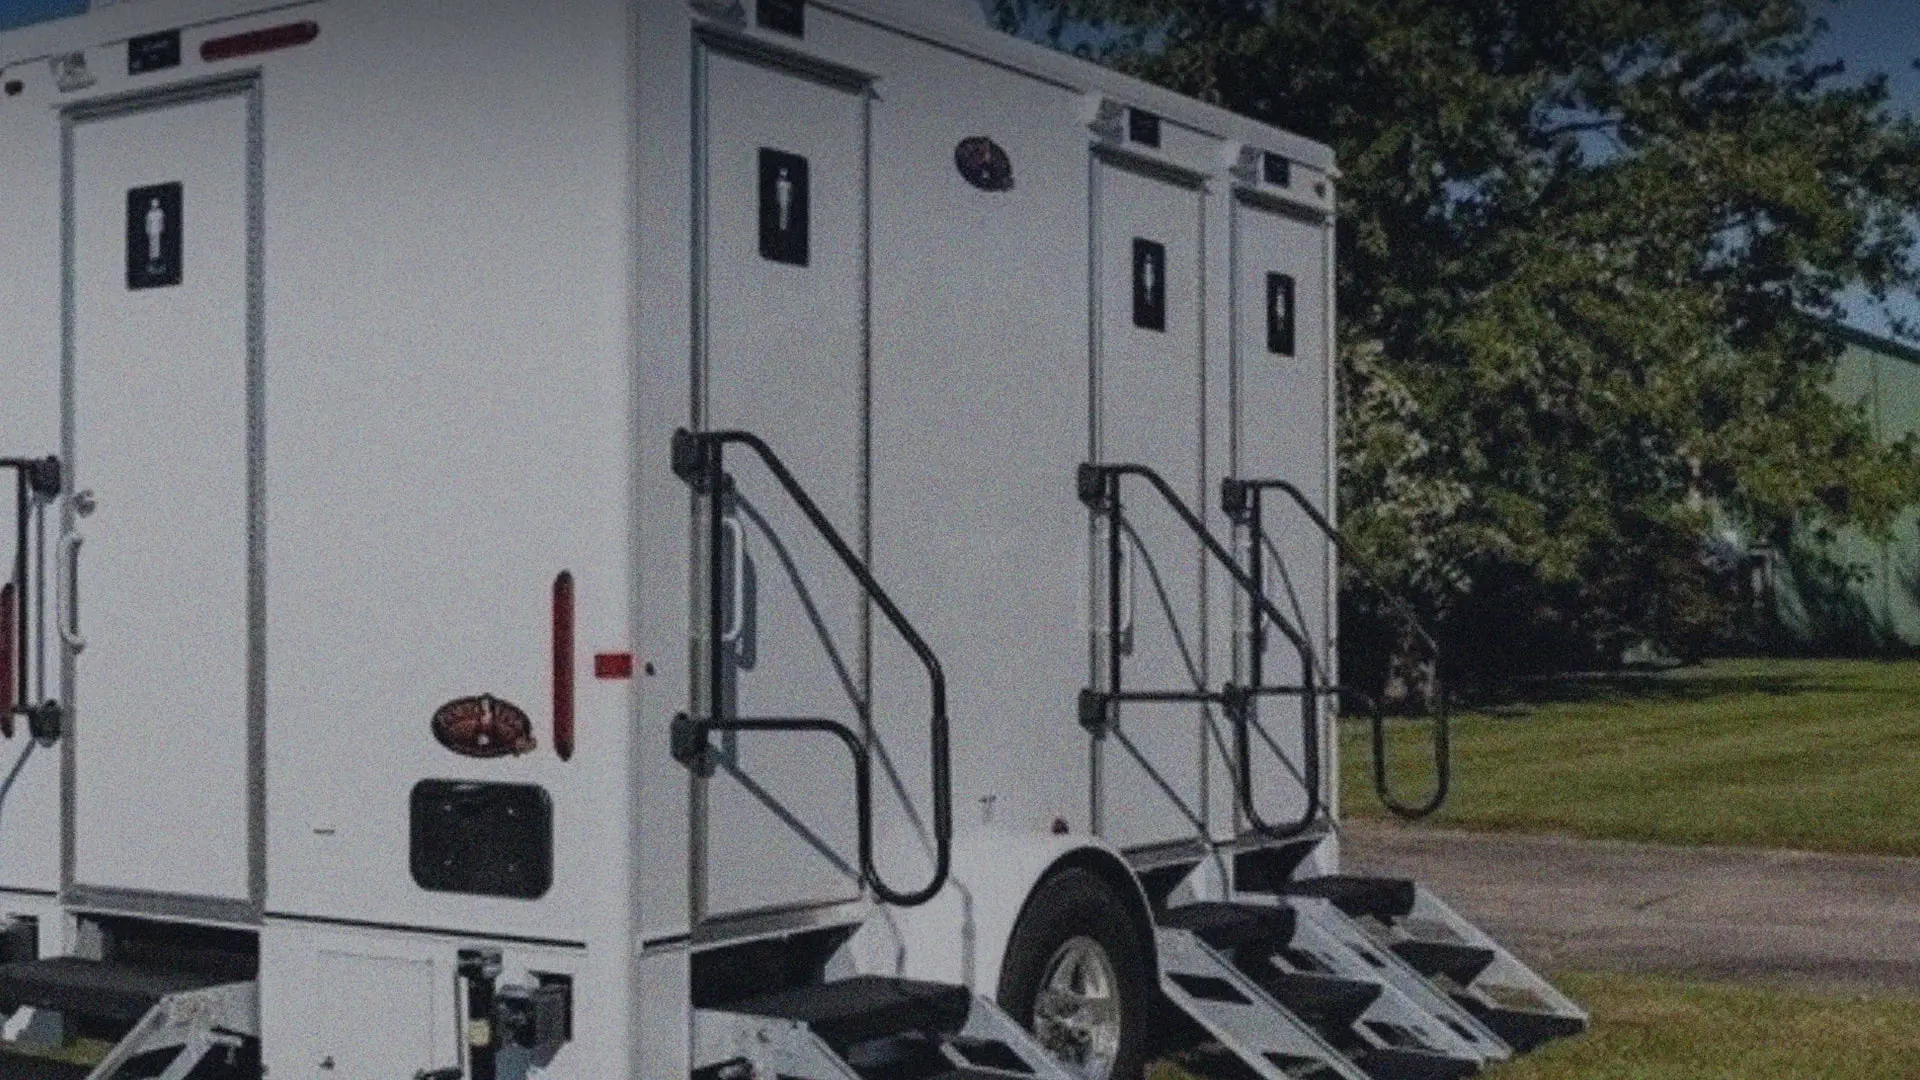 Should Portable Restroom Operator’s Invest In Luxury Restroom Trailers? | Blog for Portable Toilet & Dumpster Rental Businesses | ServiceCore